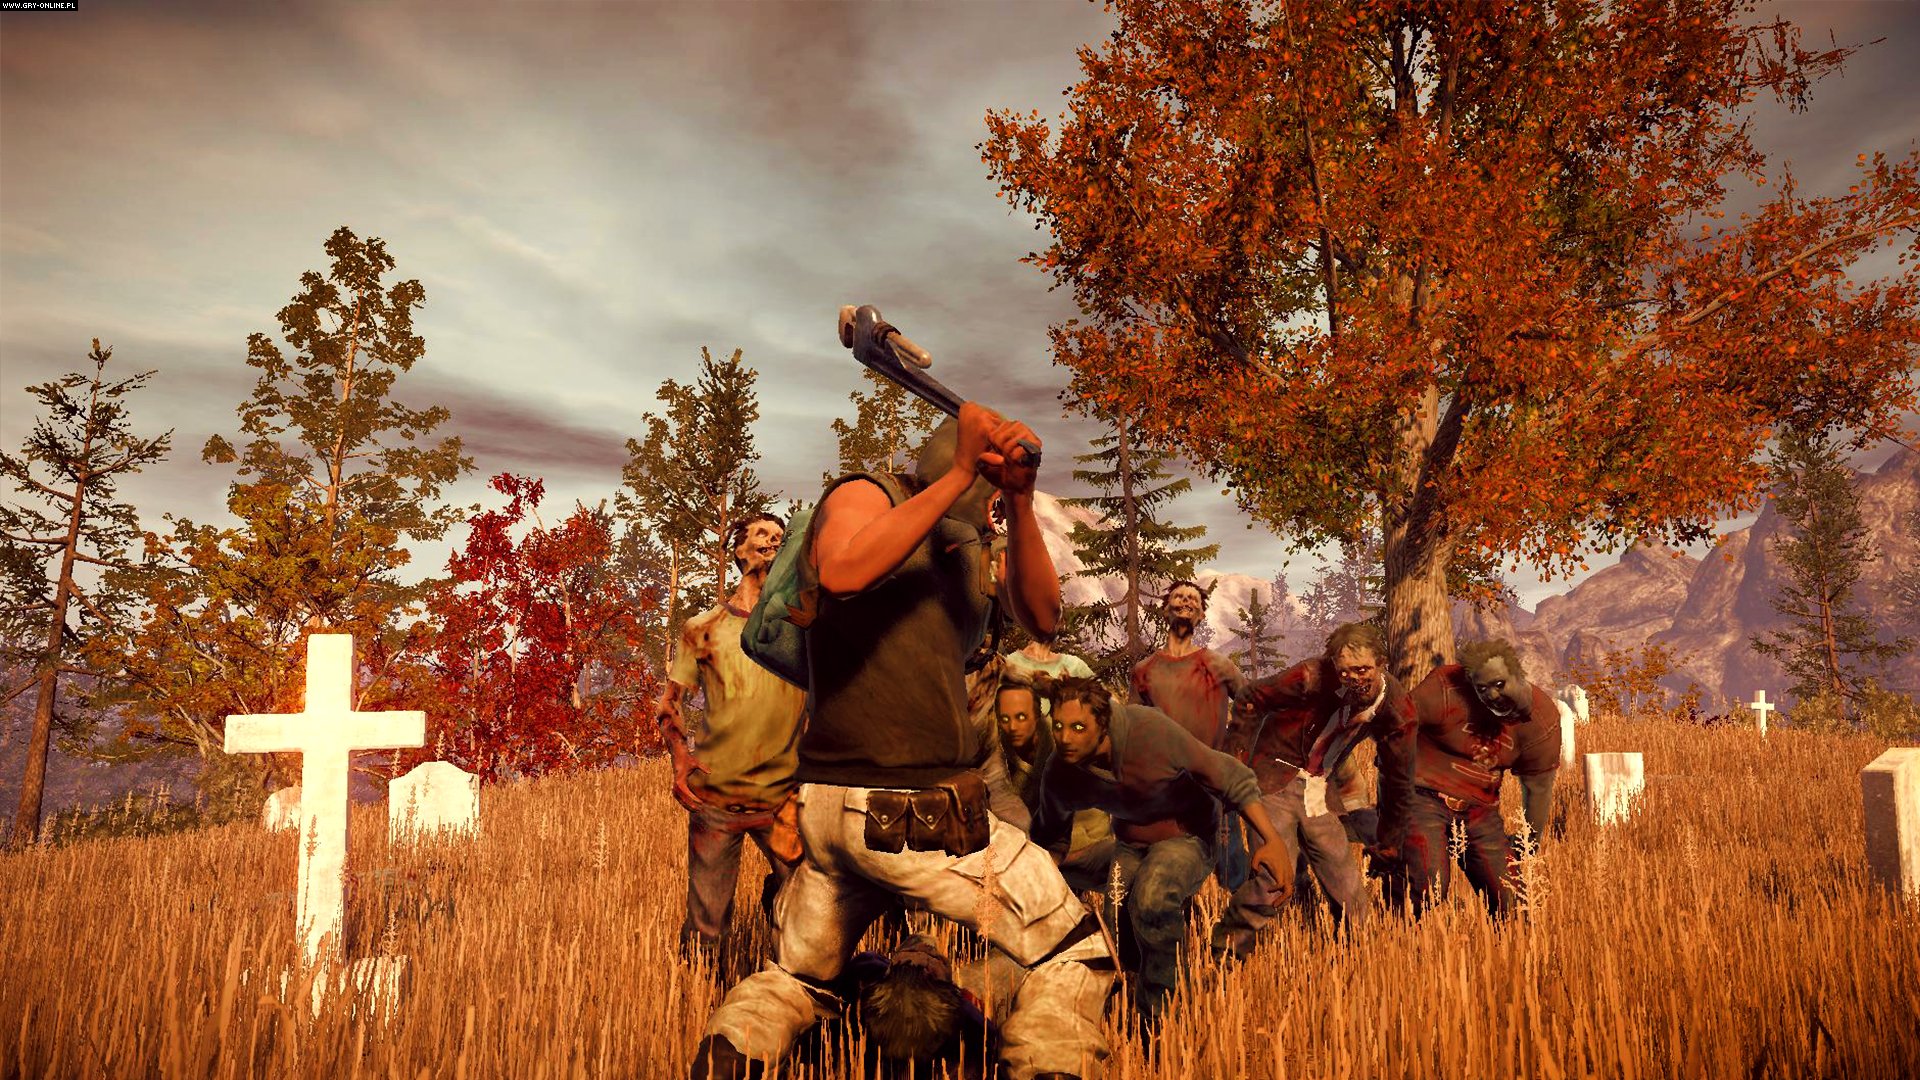 State of Decay: Year One Survival Edition Update 4 Repack